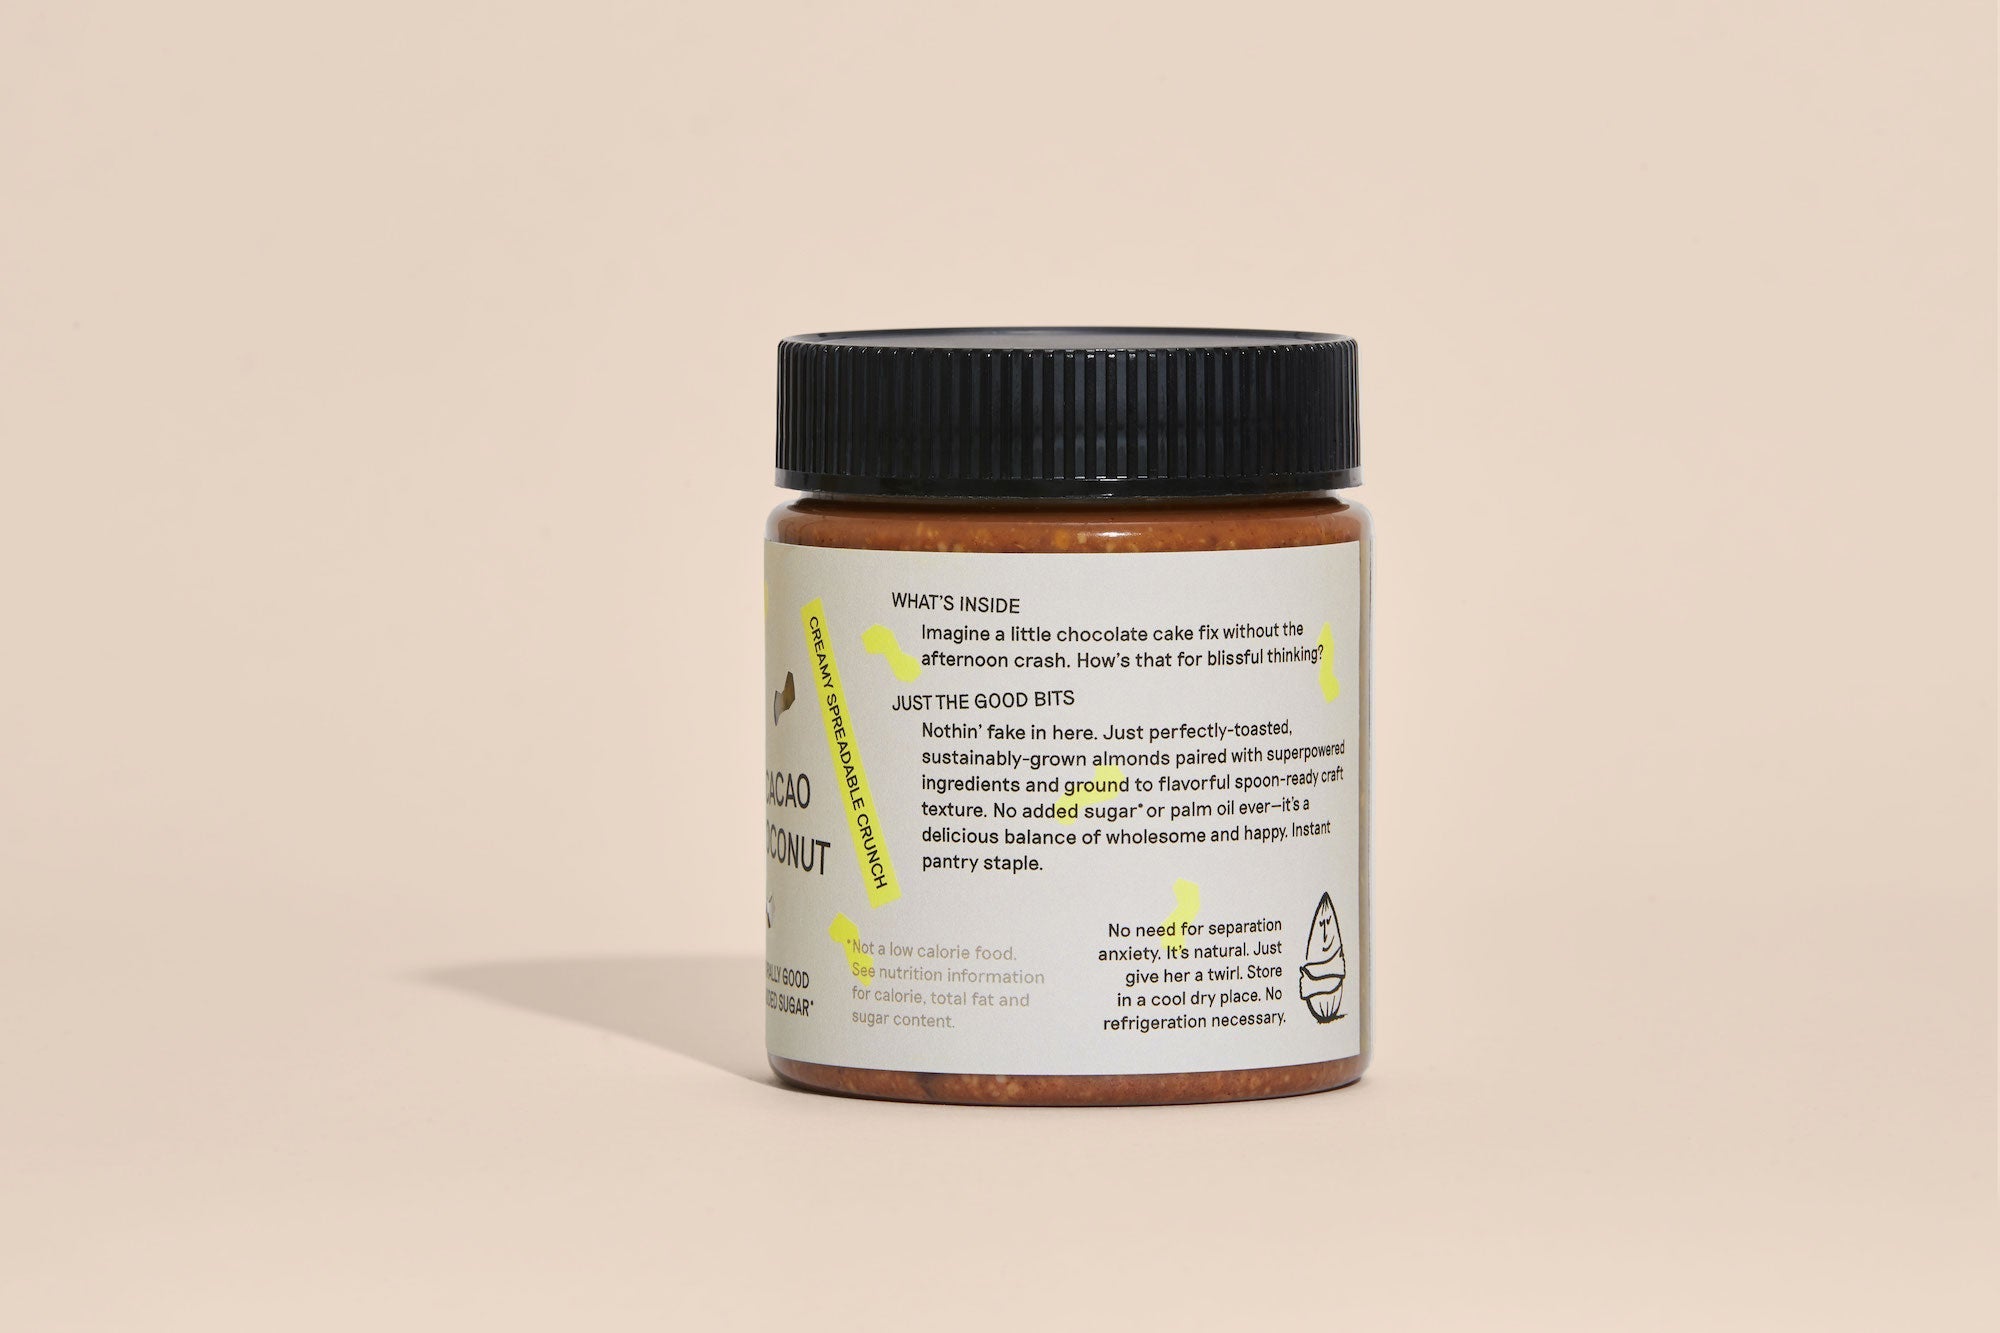 Raw Cacao Coconut Almond Butter - Revival Food Co. - Consumerhaus